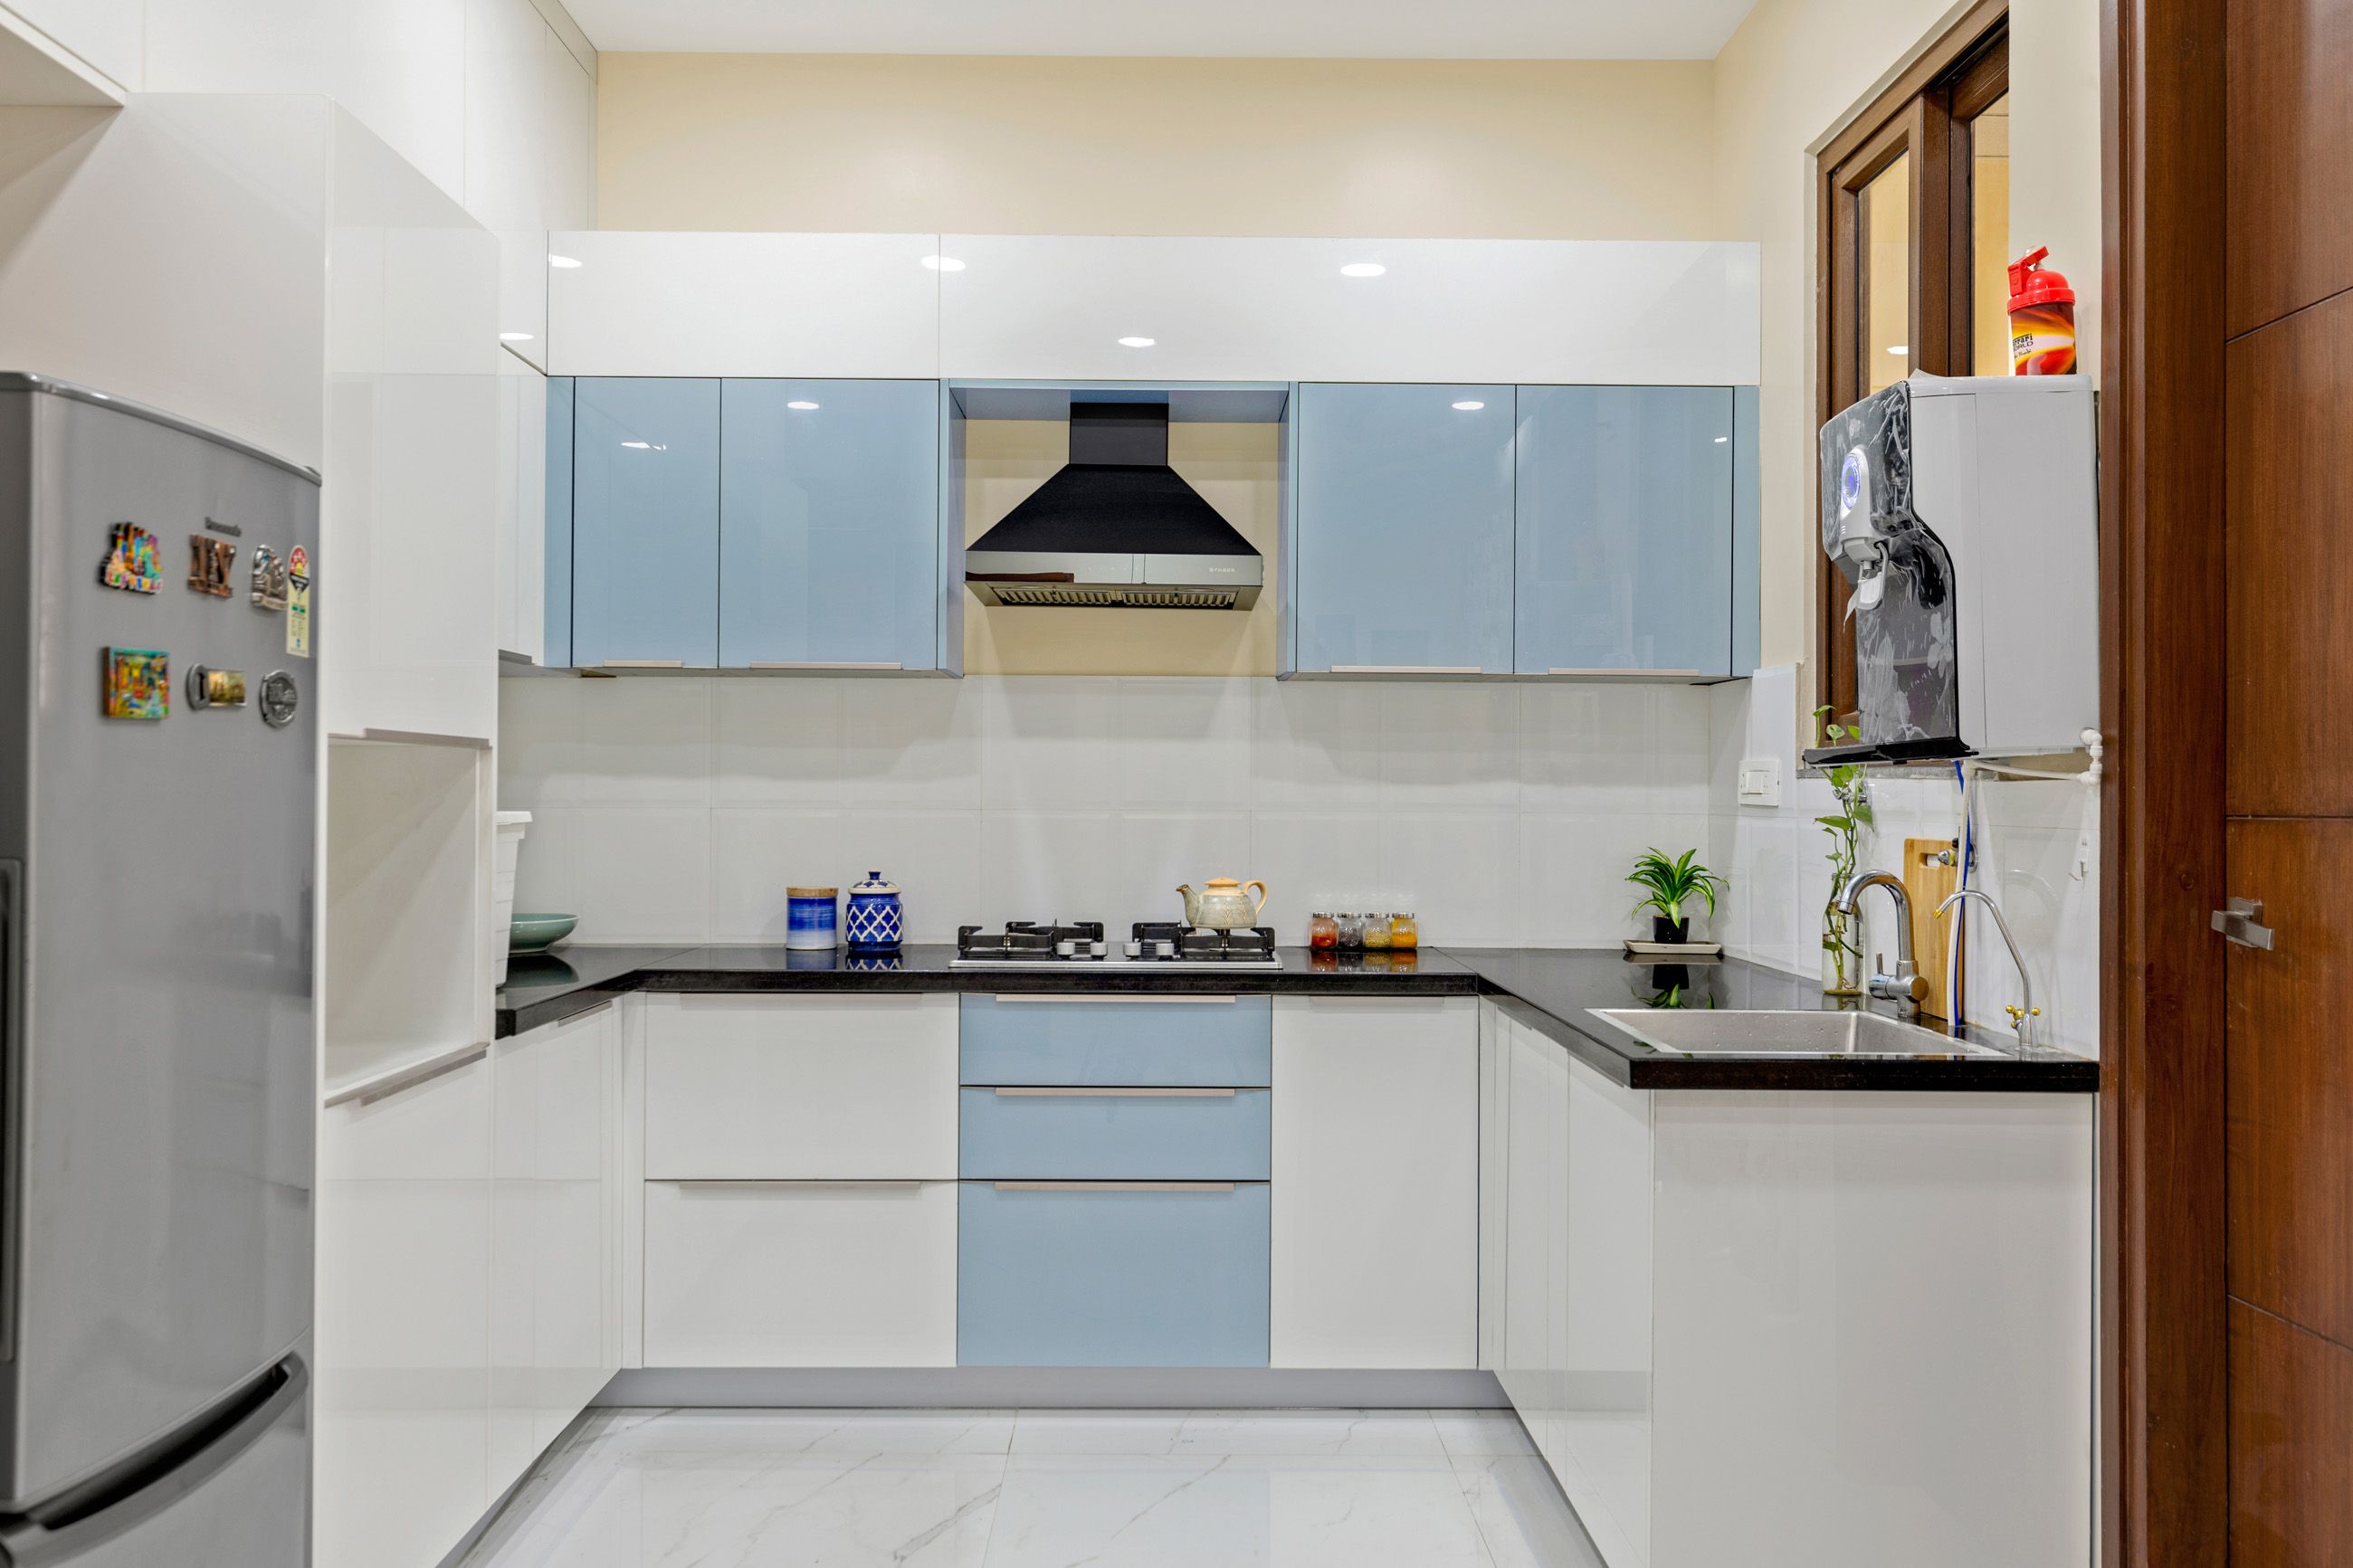 Contemporary 3-BHK Interior Design In Hyderabad With U-Shaped Blue And White Glossy Kitchen